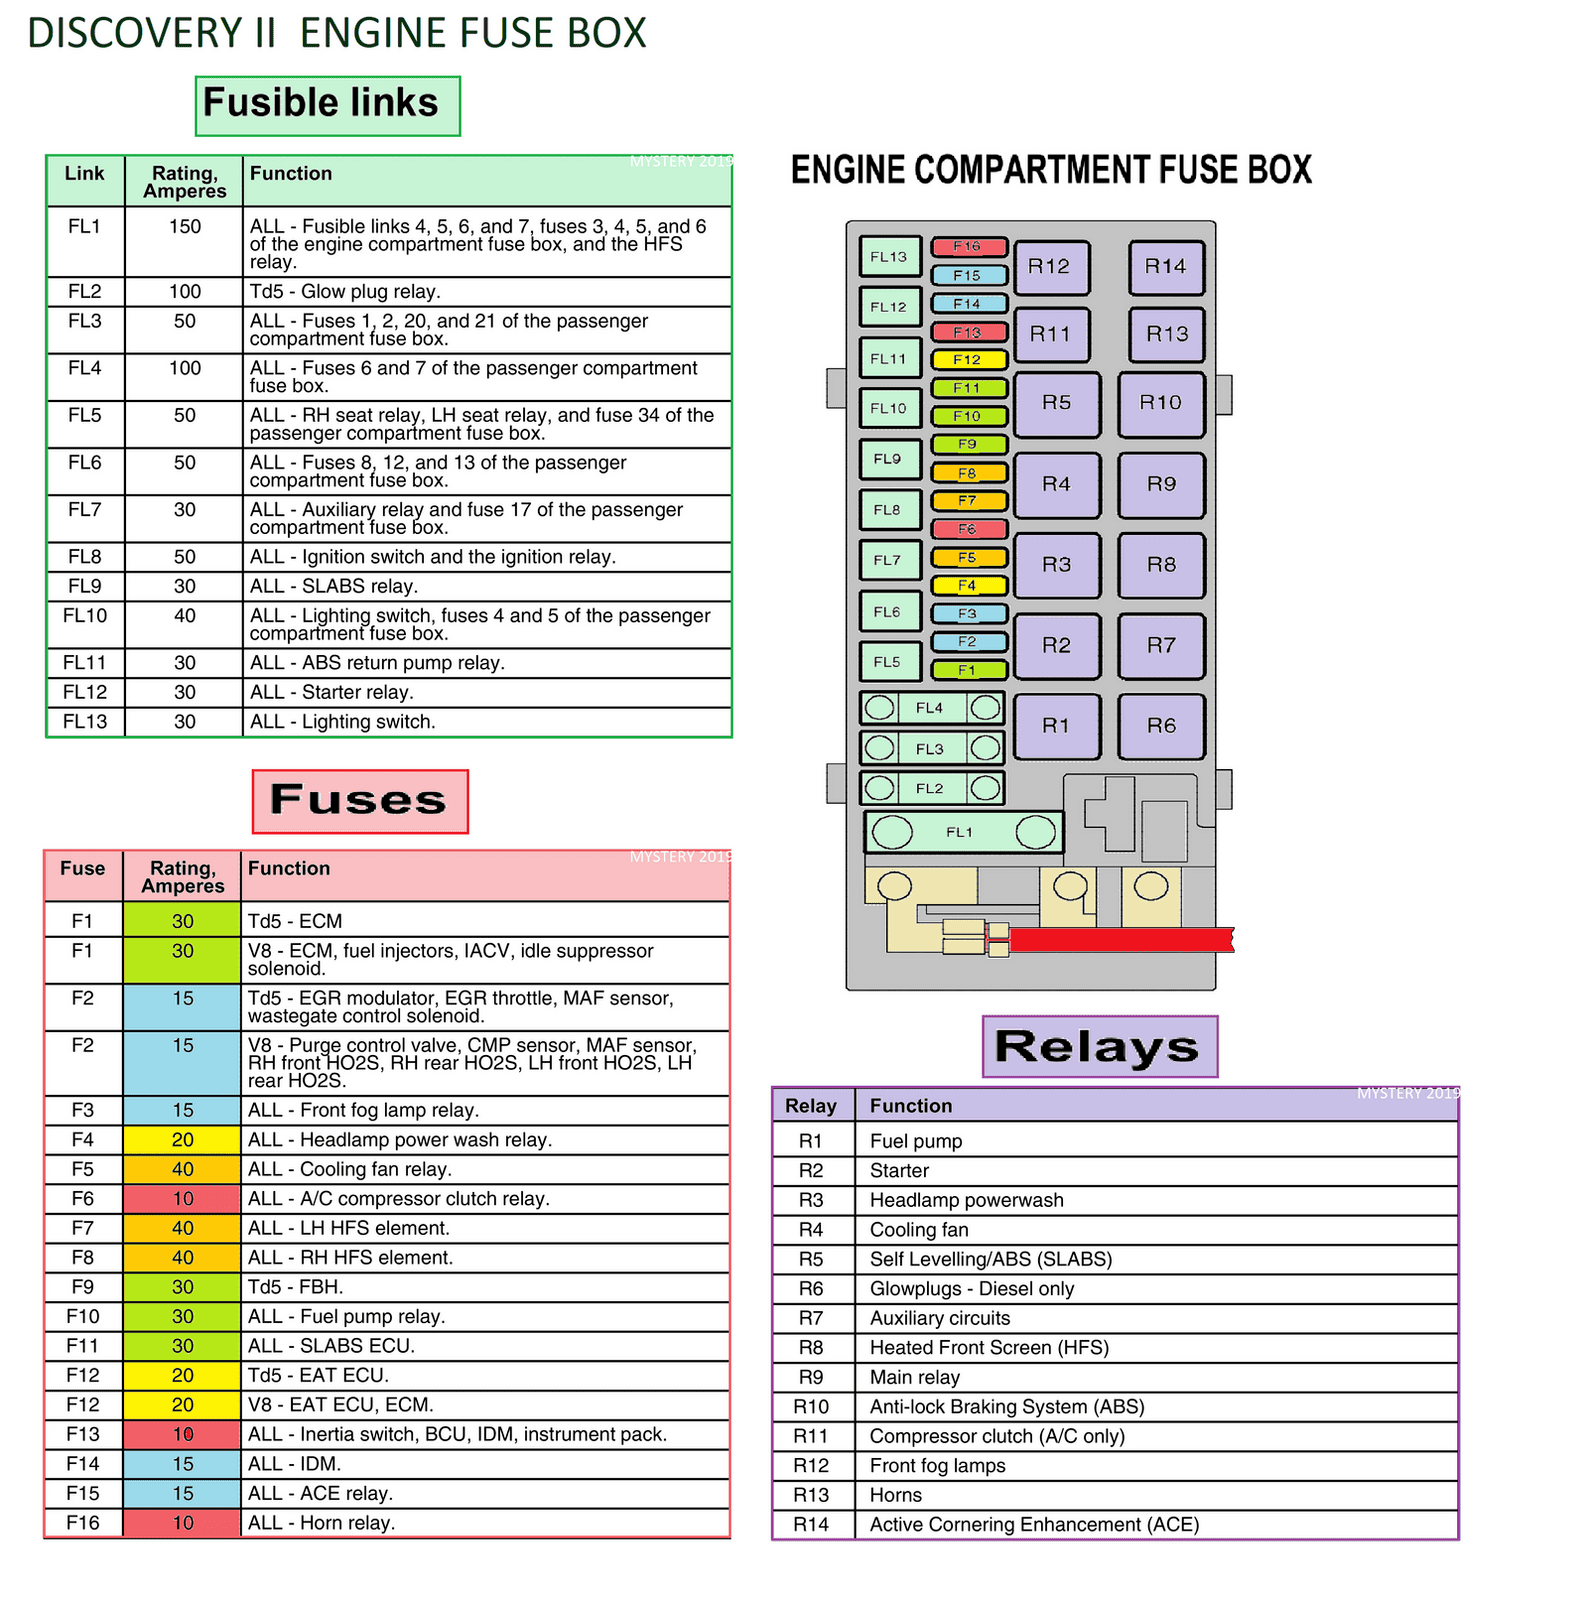 DISCOVERY II ENGINE FUSE BOX.png